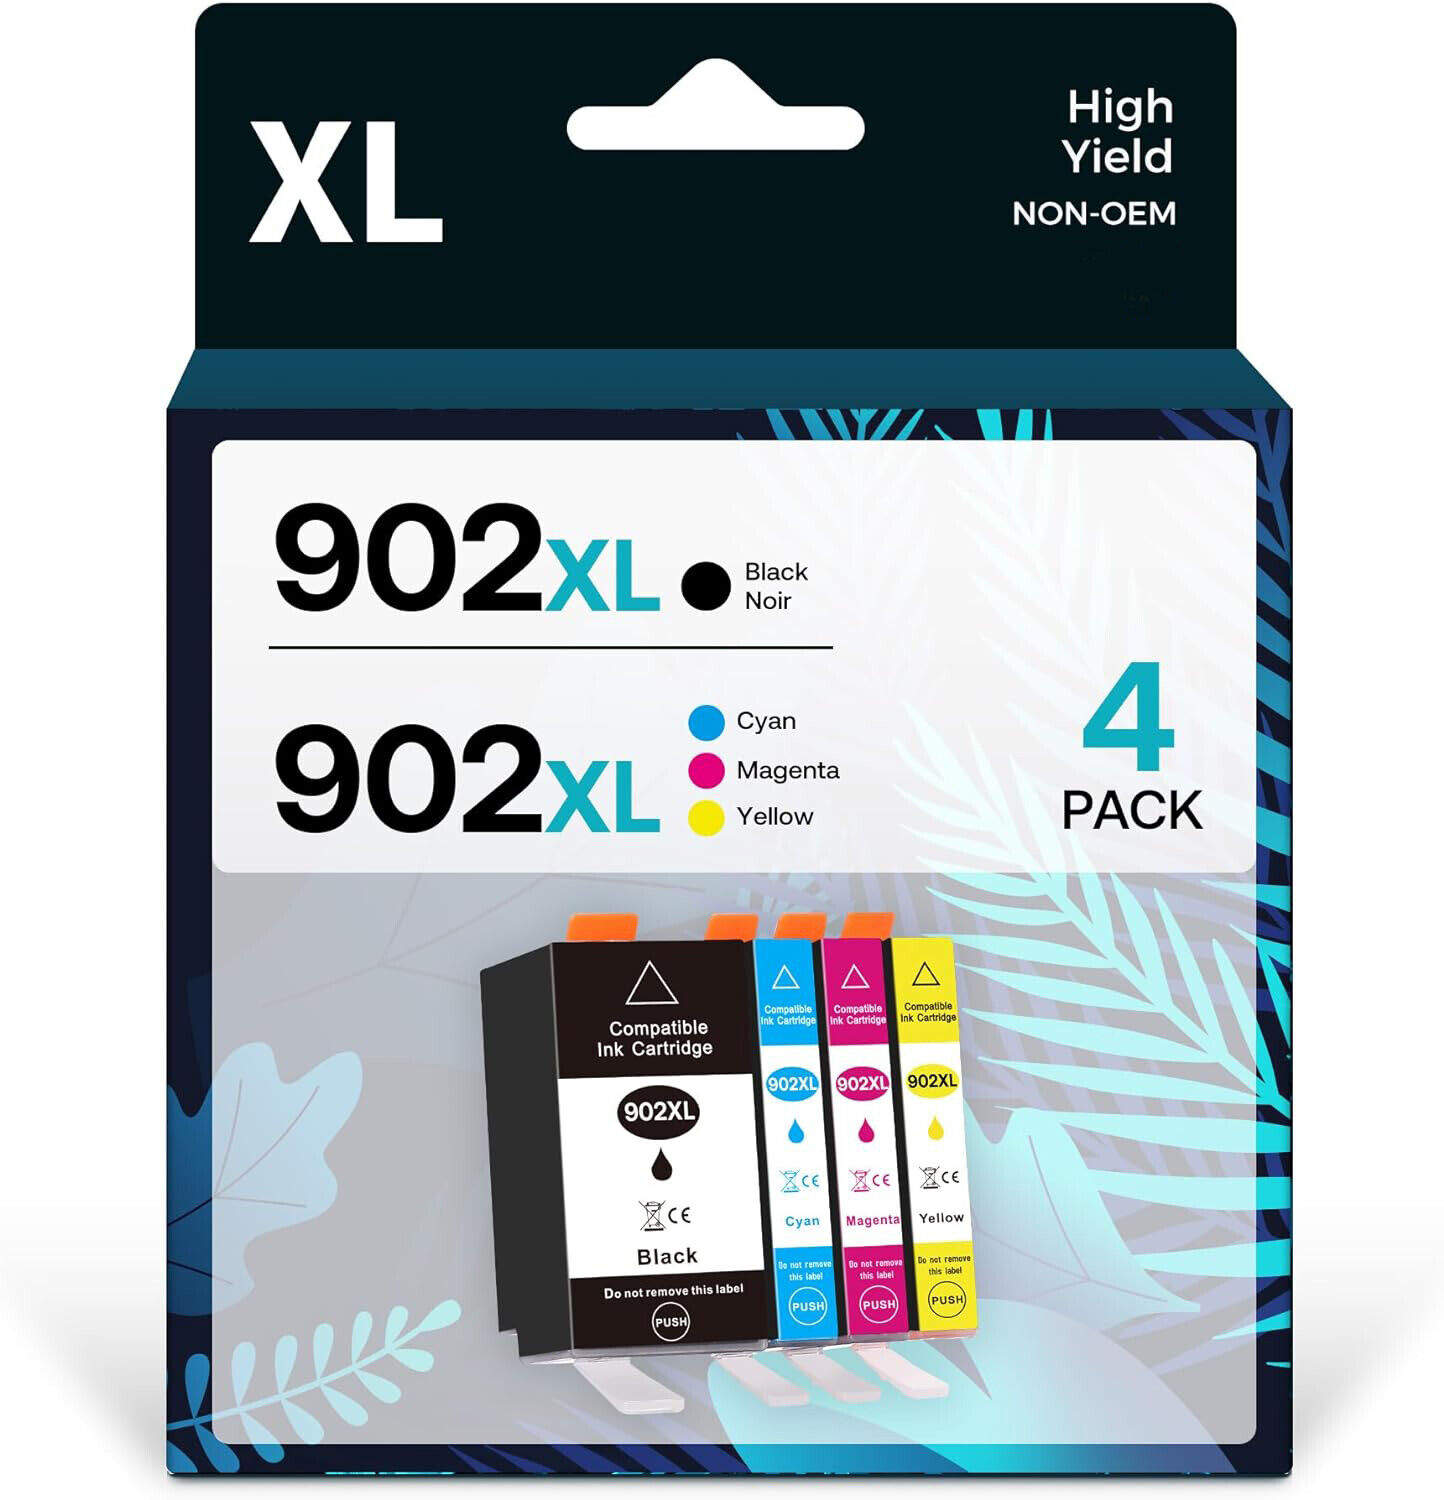 4Pack 902XL Ink Cartridges for HP 902 Officejet Pro 6978 6960 6968 6970 6975 Lot